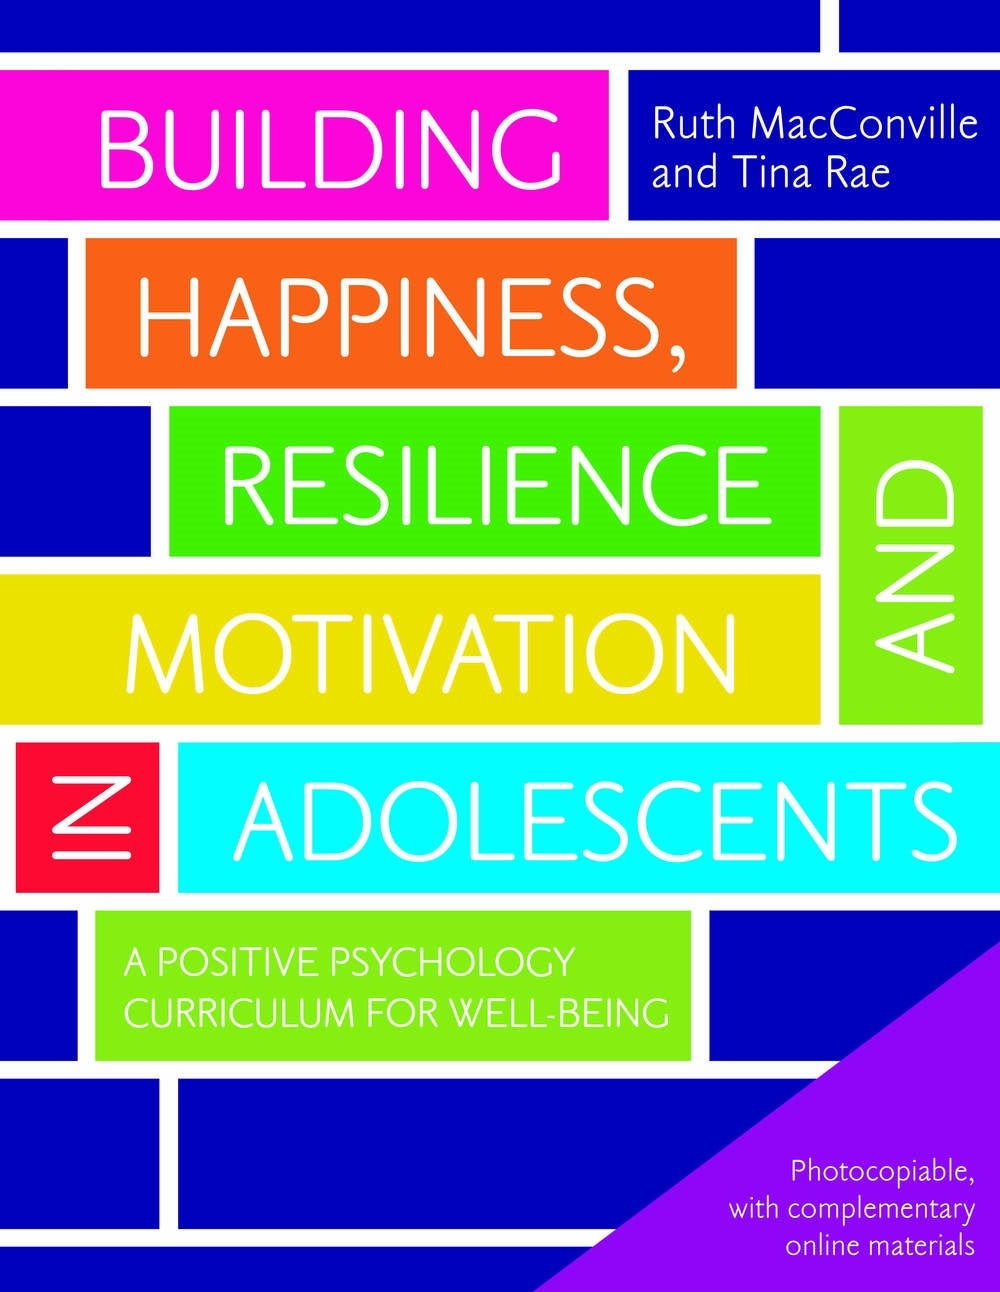 Building Happiness, Resilience and Motivation in Adolescents by Tina Rae, Ruth MacConville